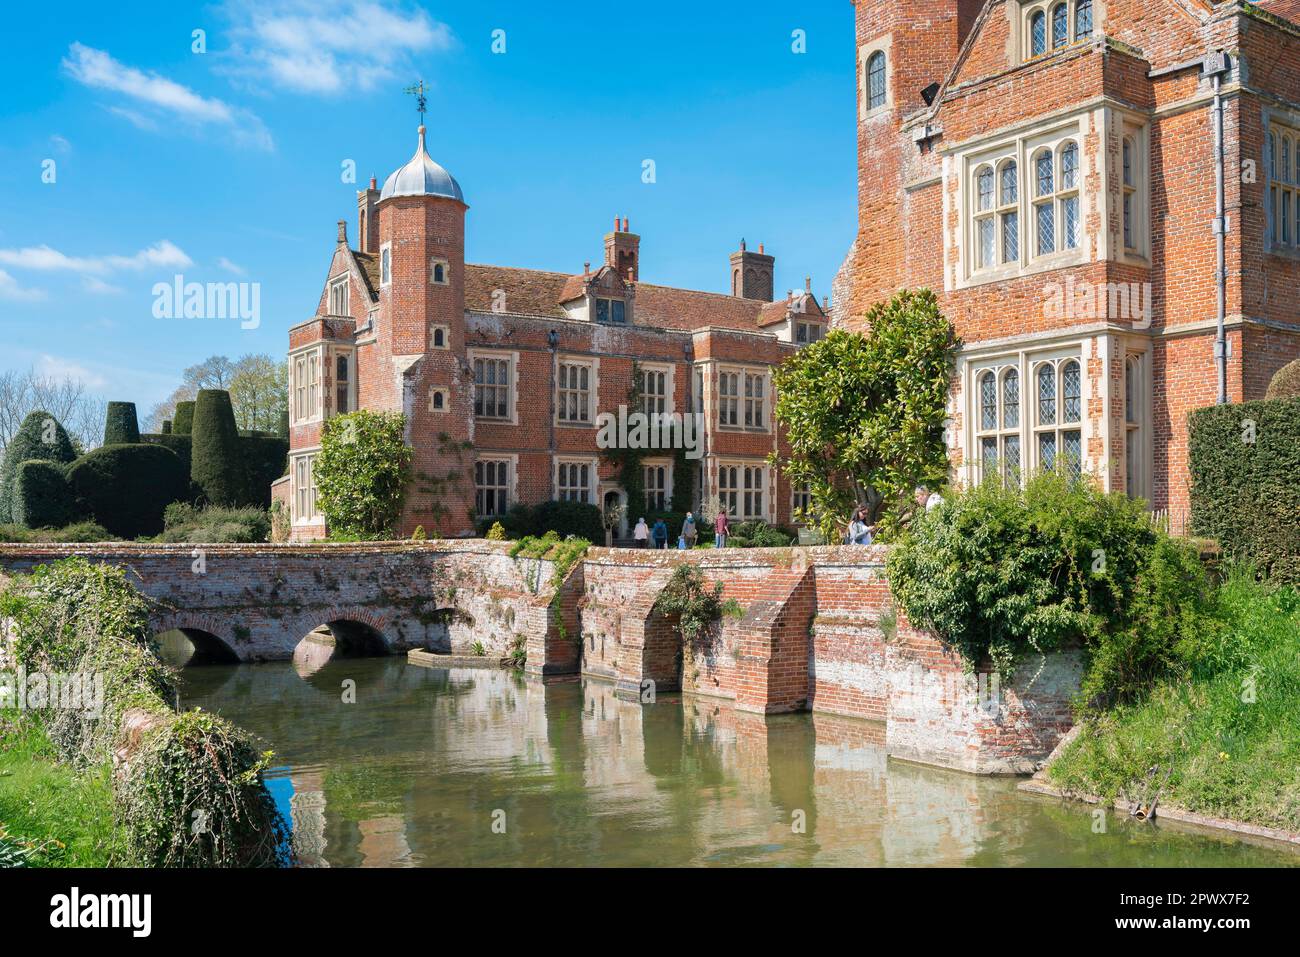 Stately home England, view in summer of the moat and south facing facade of Kentwell Hall, a mid 16th century country house in Suffolk, England Stock Photo